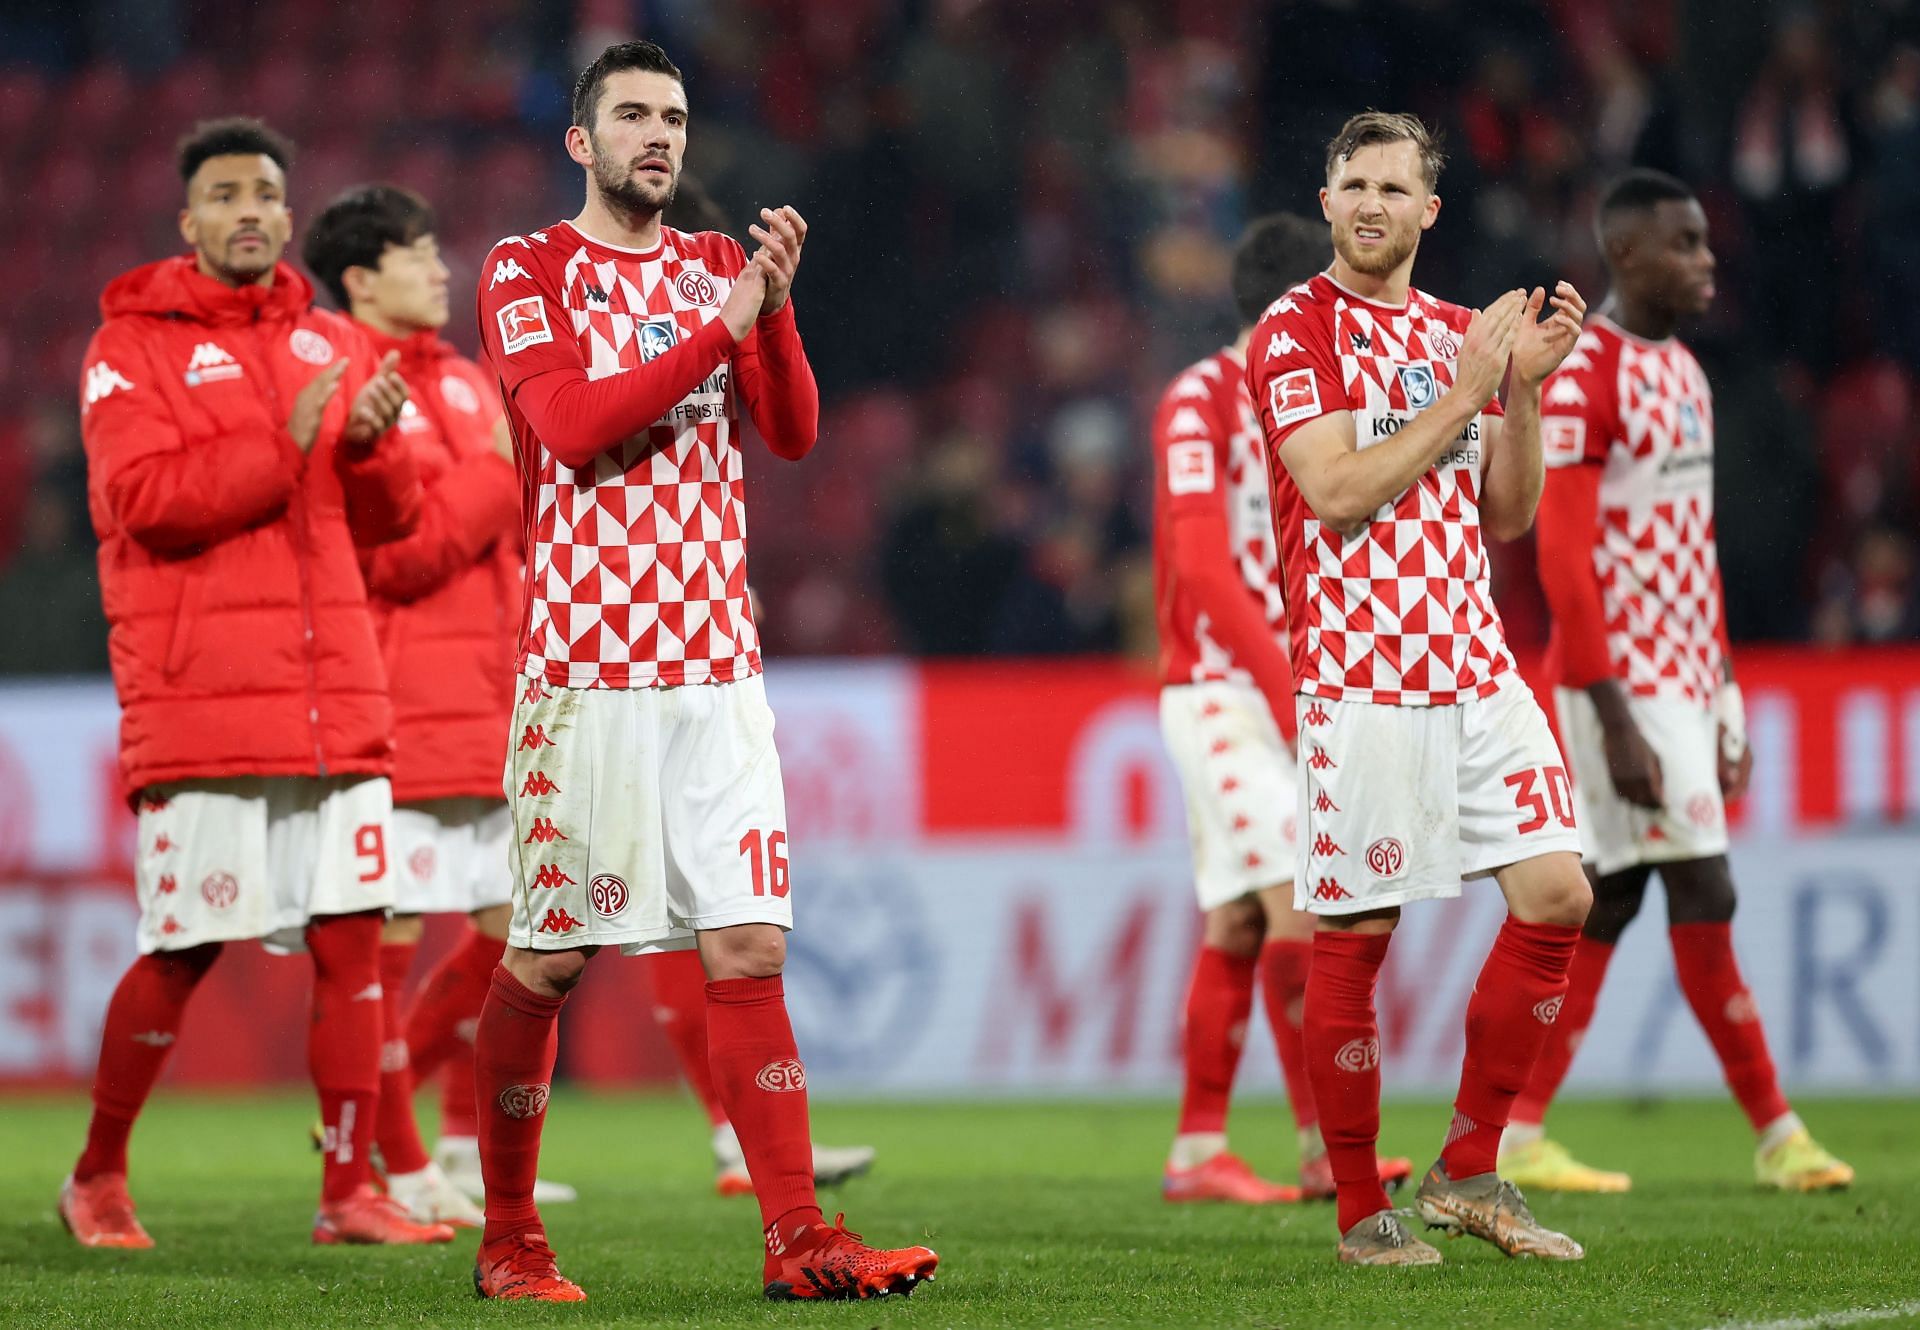 Mainz will look to continue their strong run of form